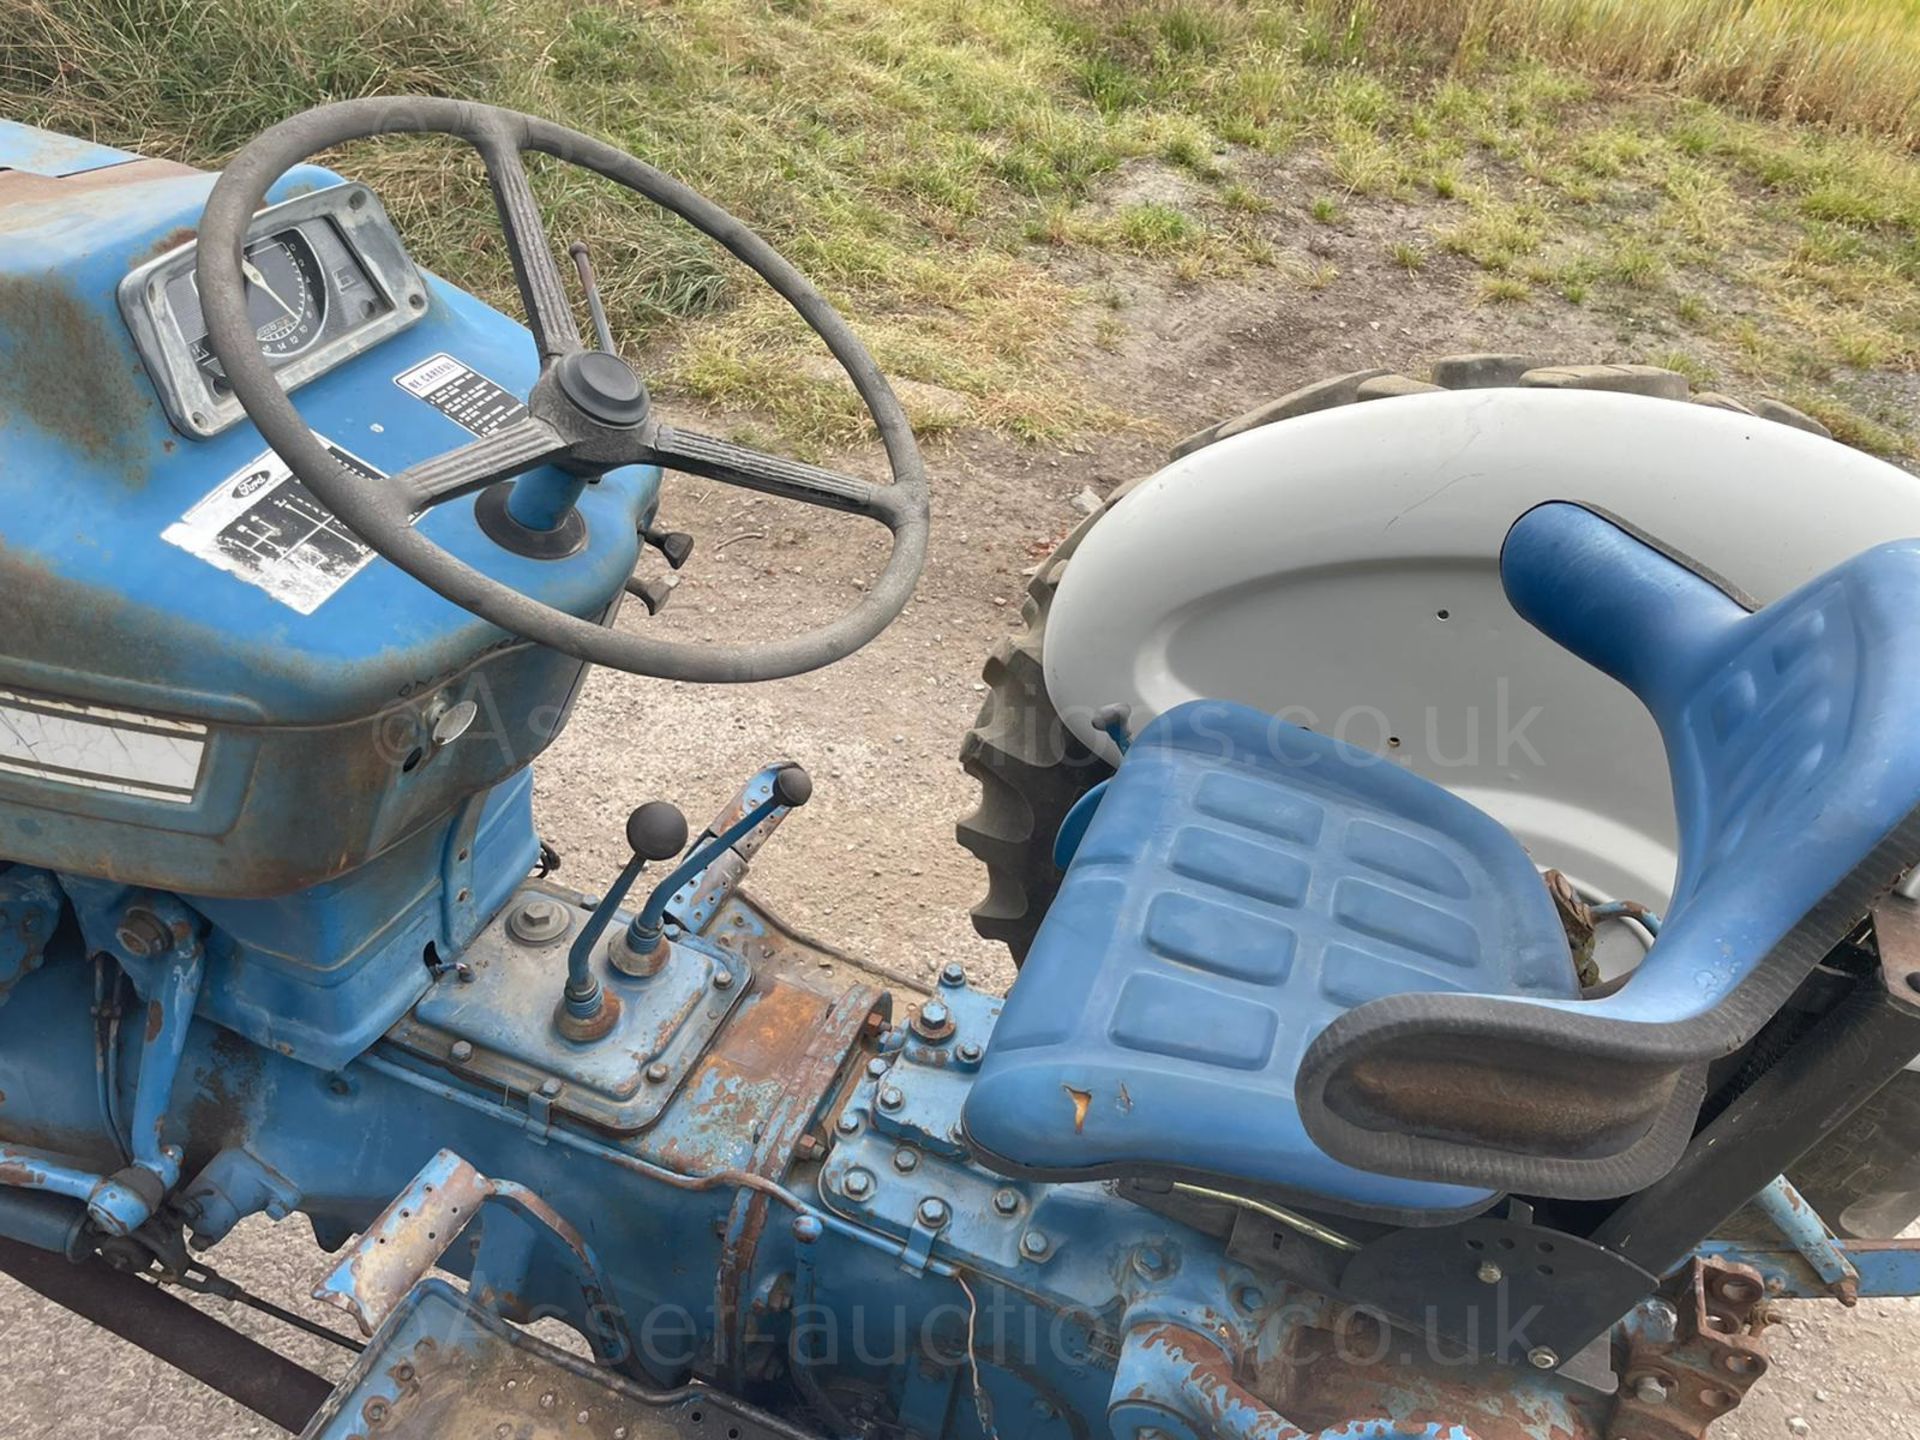 RARE FORD 3000 PETROL VINTAGE TRACTOR, RUNS AND DRIVES, SHOWING 2882 HOURS, ALL GEARS WORK*PLUS VAT* - Image 6 of 7